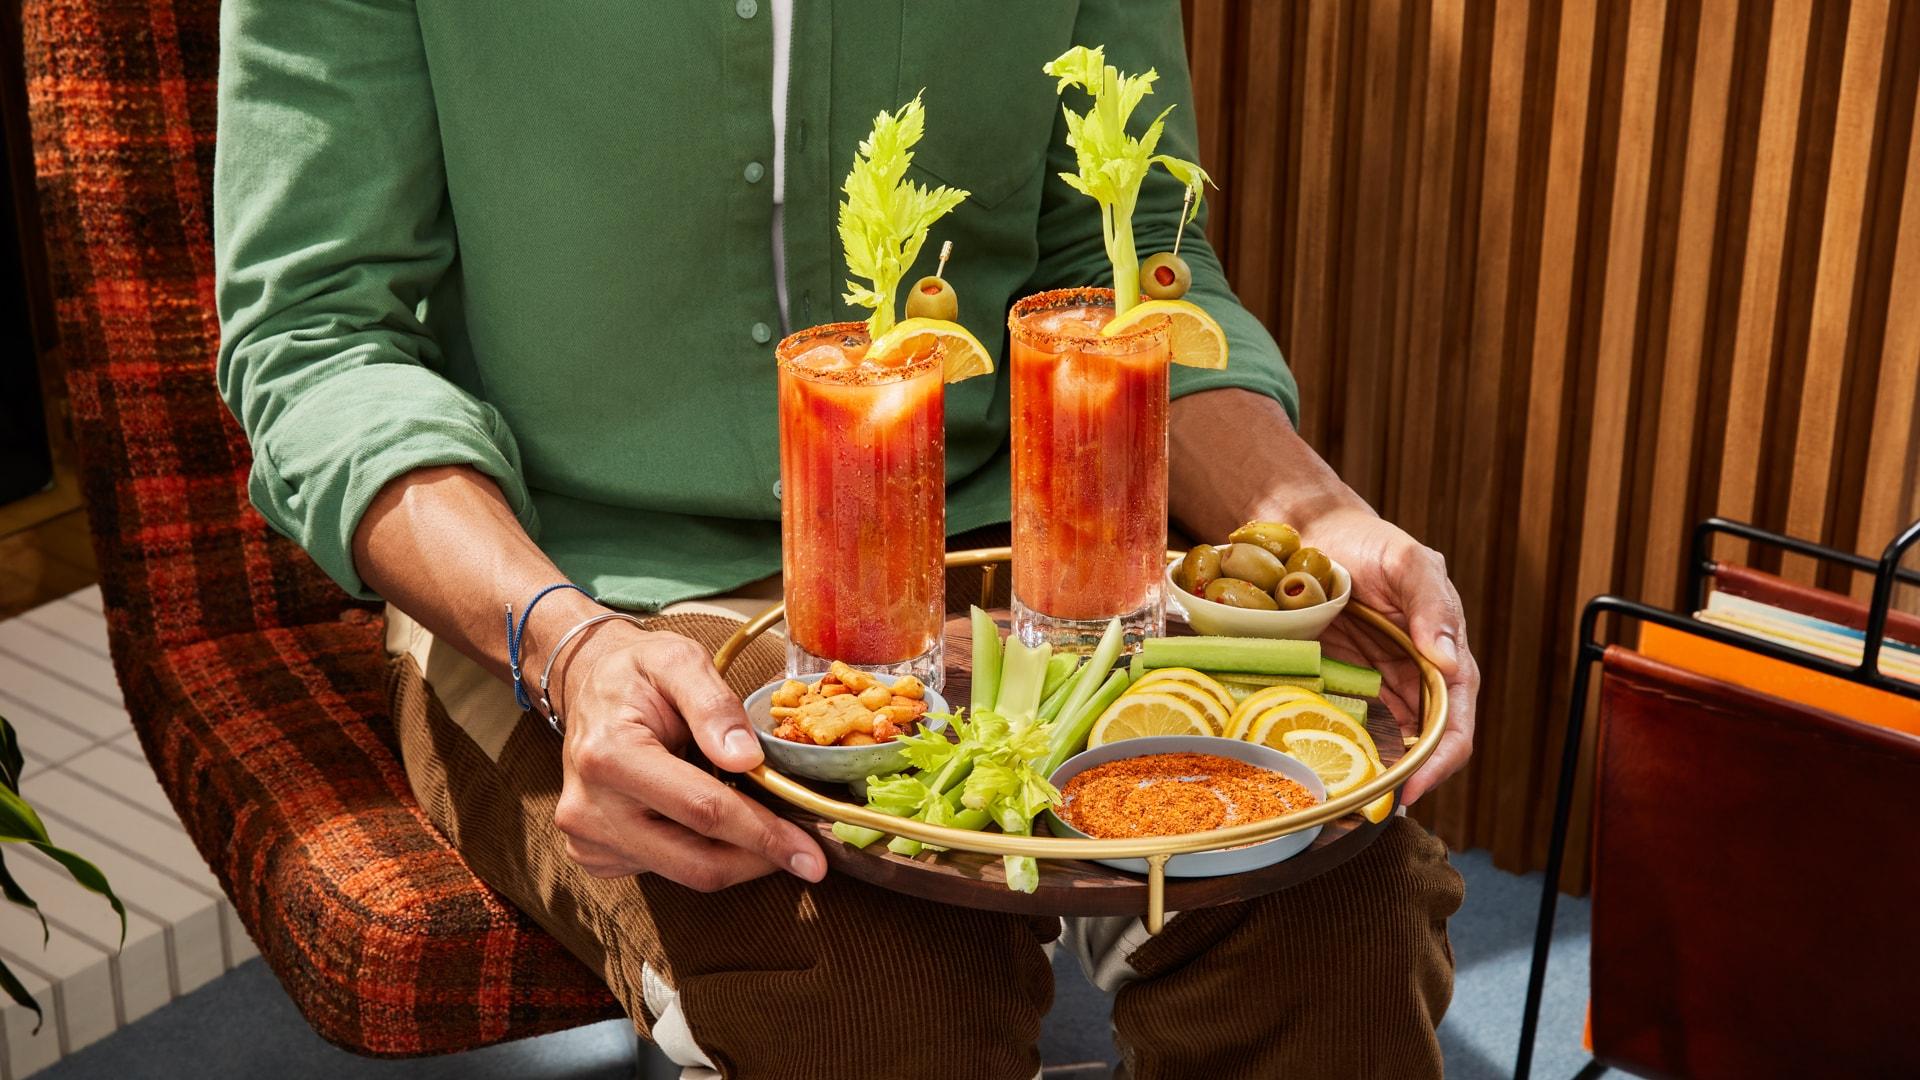 Two Bloody Mary’s on a tray accompanied by the ingredient